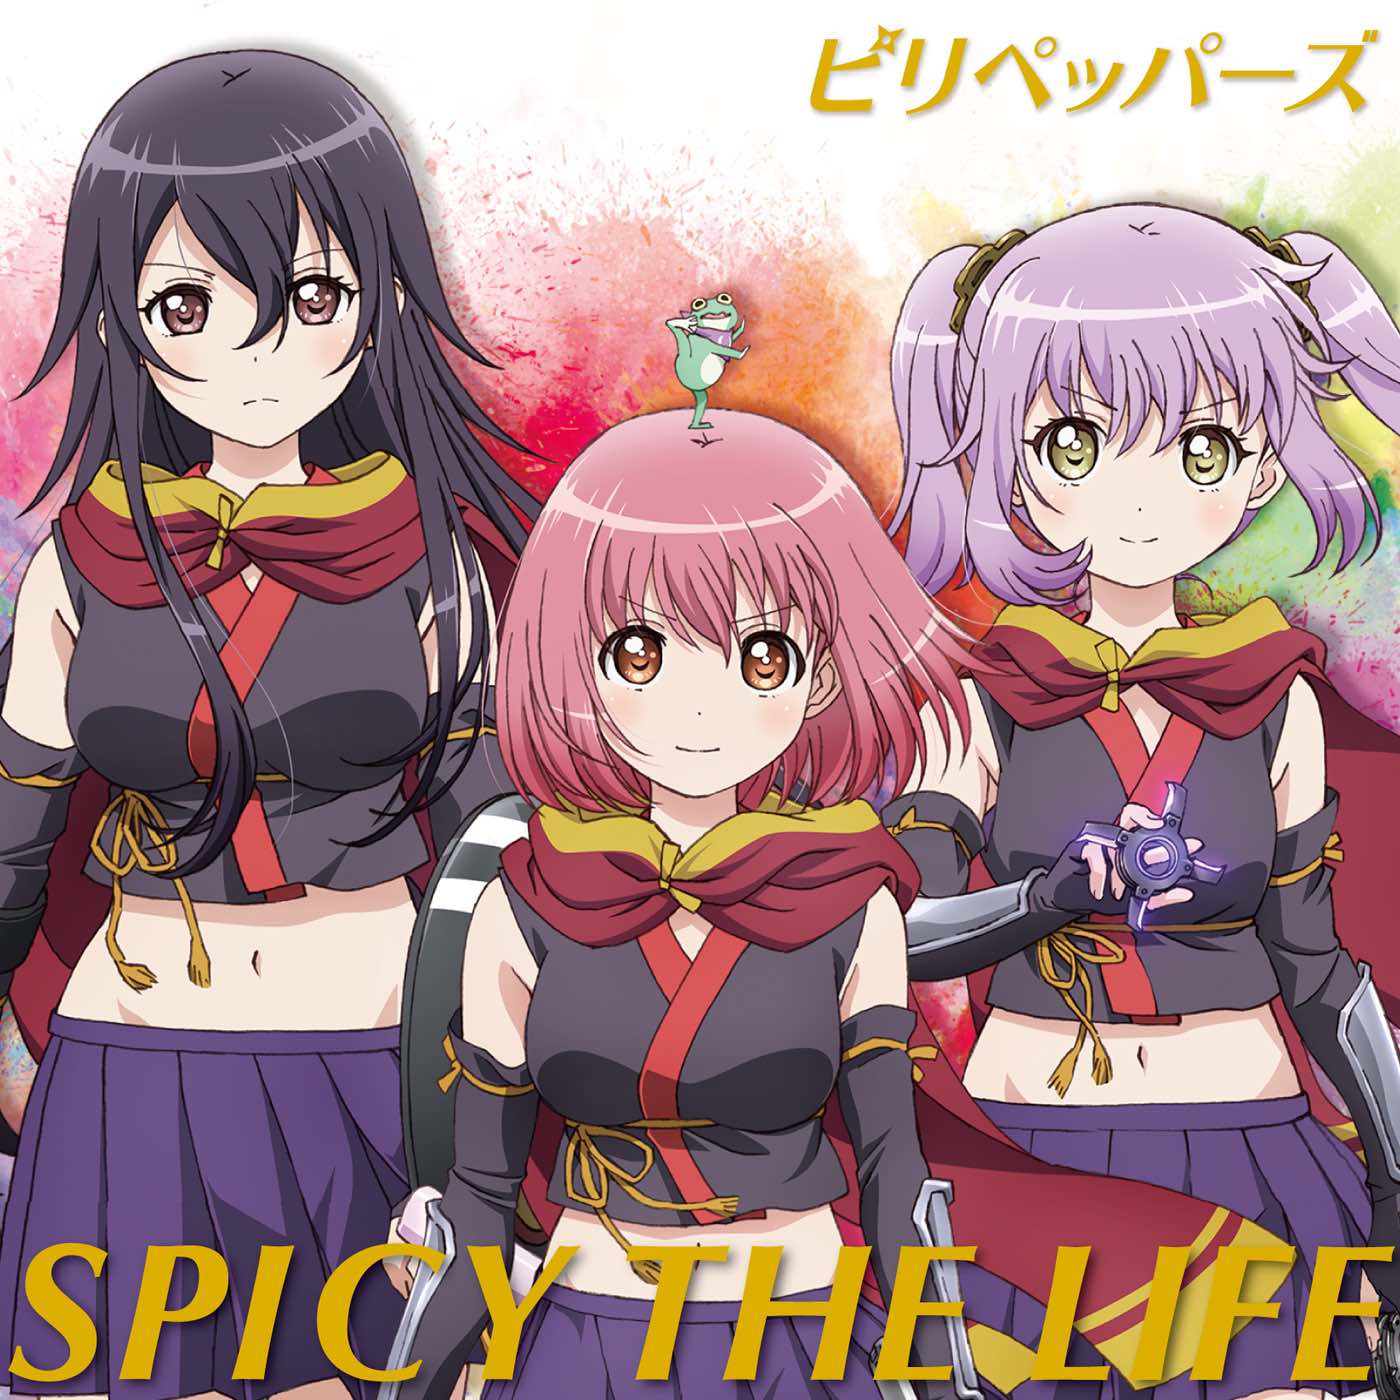 Release The Spyce 壁紙